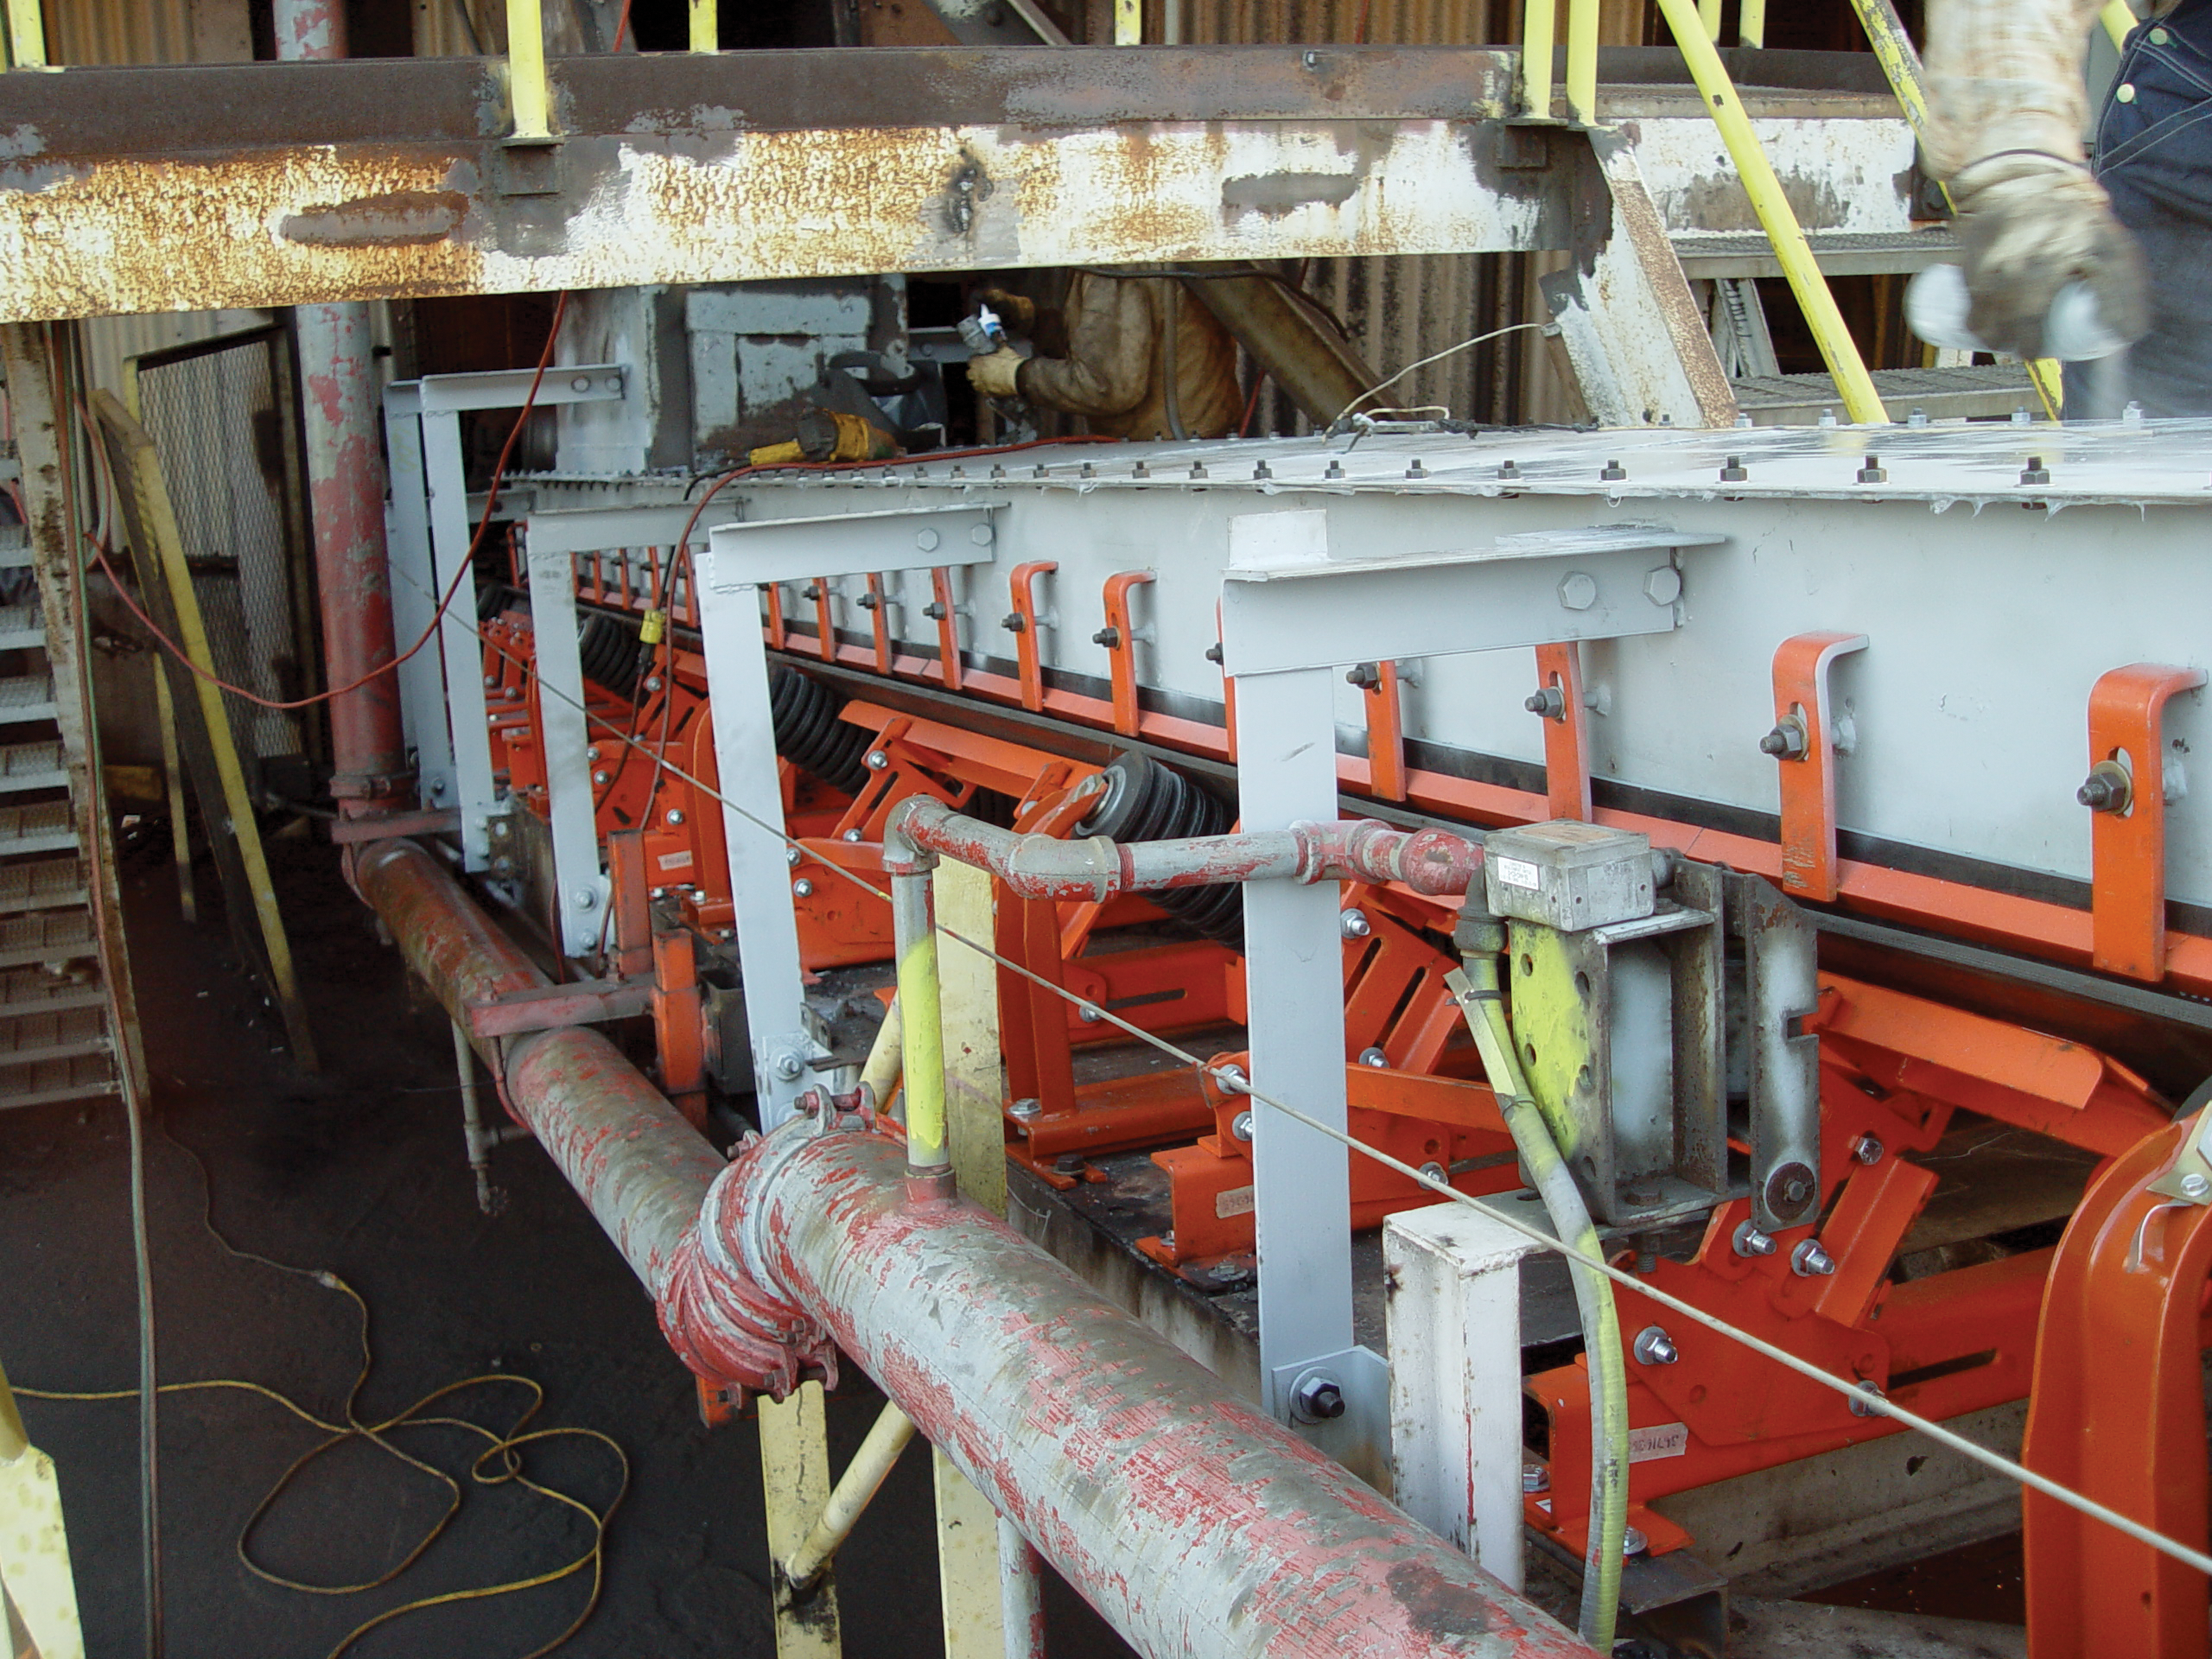 Belt support cradles and idlers installed in the load zone of a belt conveyor.